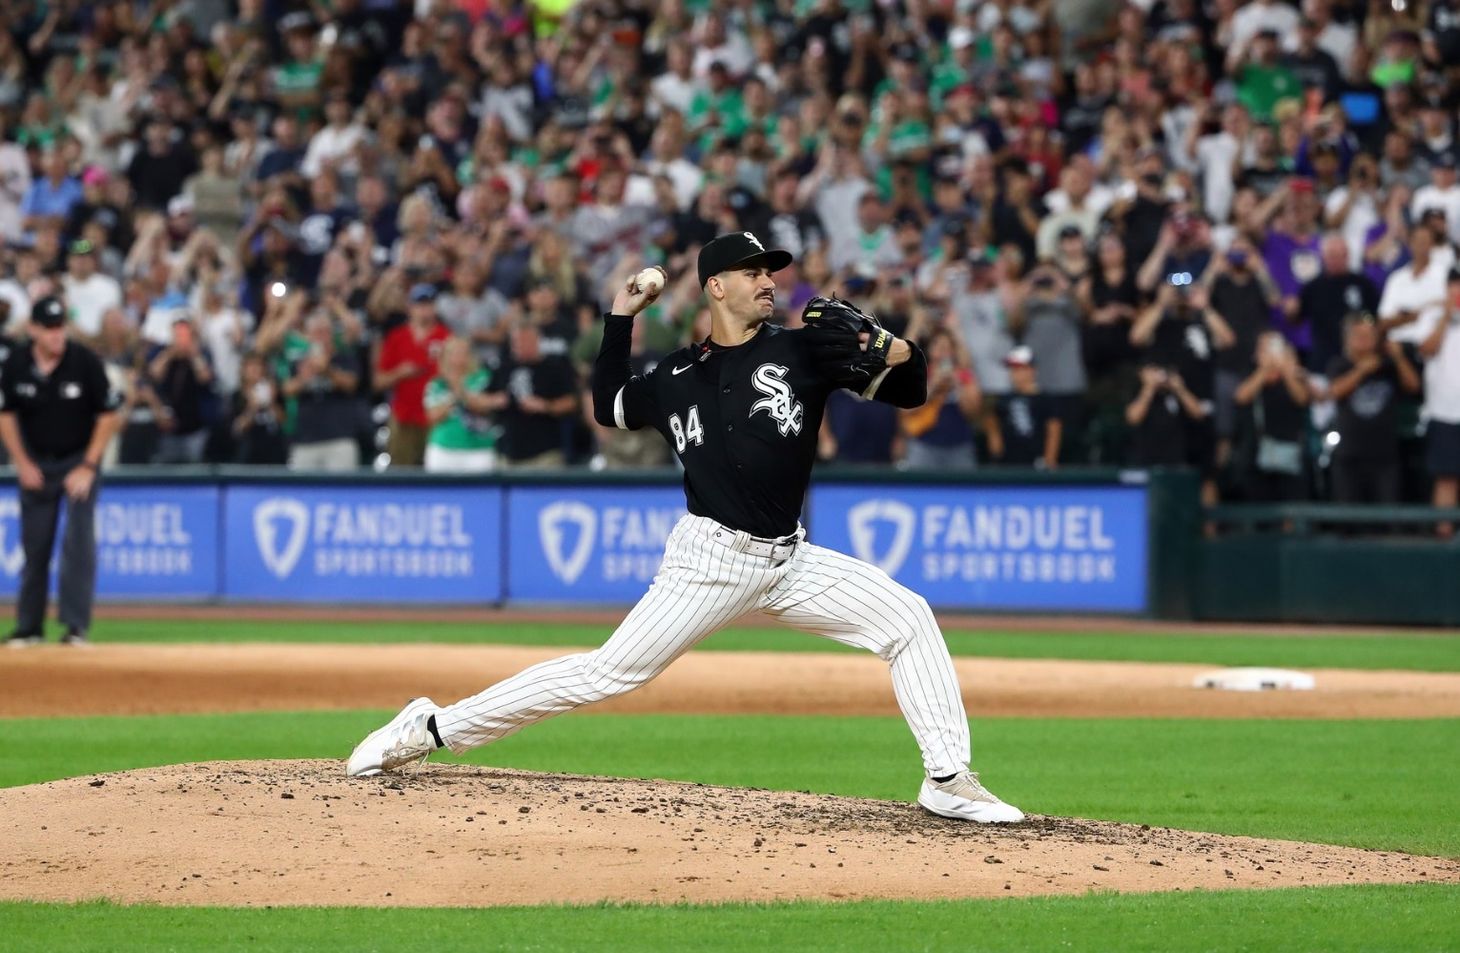 Cease comes within 1 out of no-hitter, White Sox rout Twins